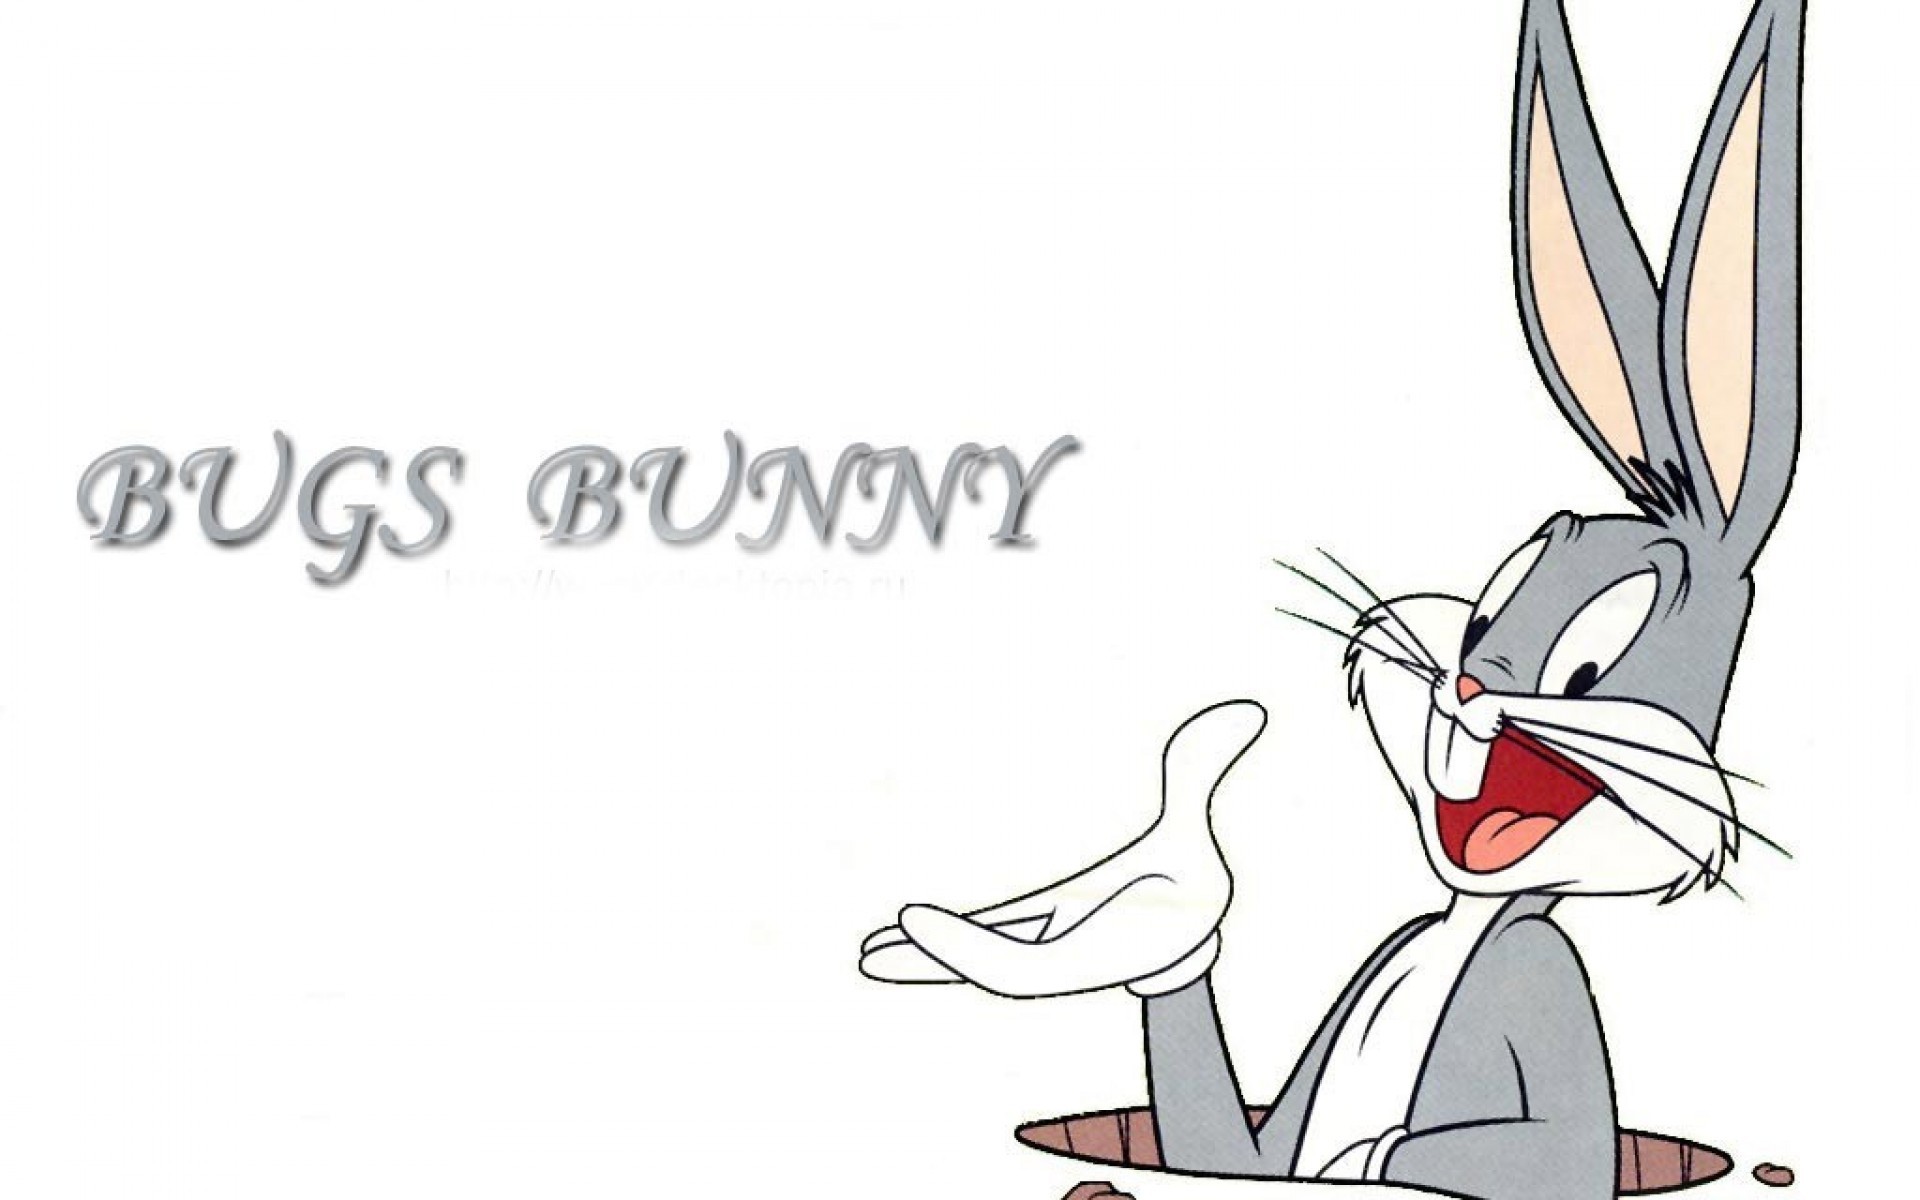 1920x1200 Bugs Bunny Backgrounds - Wallpaper, High Definition, High Quality .